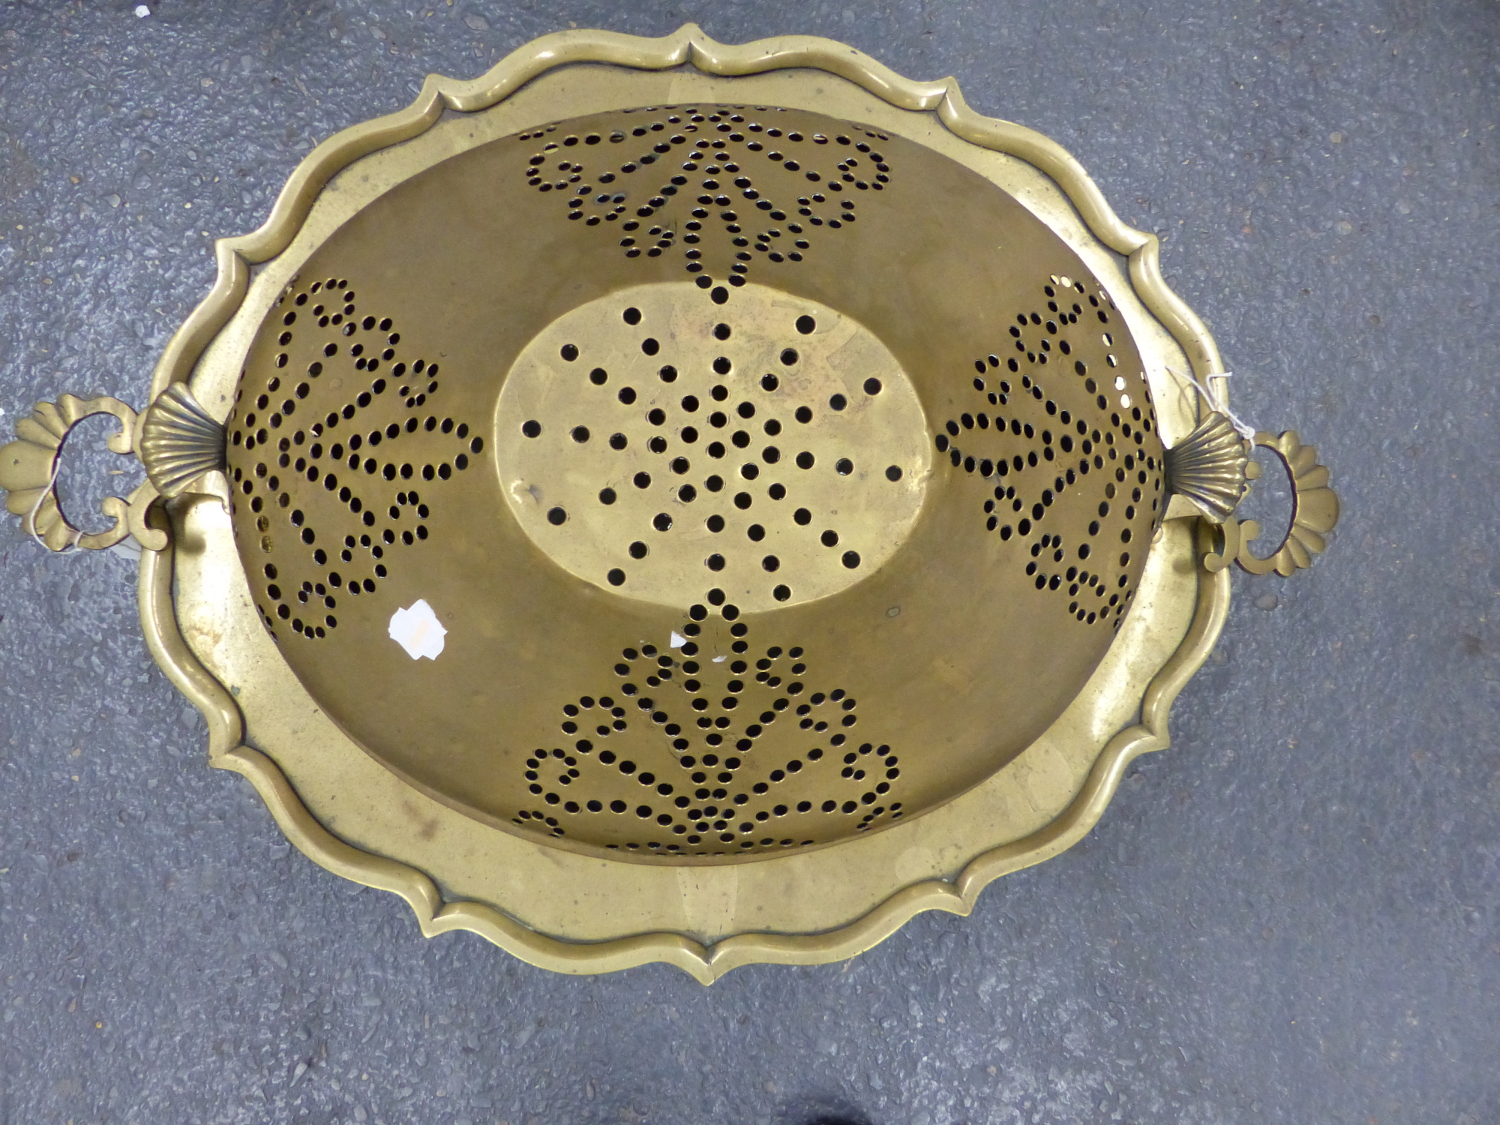 A PERSIAN HEAVY CAST AND PIERCED BRASS BRAZIER WITH DOME COVER, OVAL LOBED FORM WITH SCROLL FEET. H. - Image 3 of 6